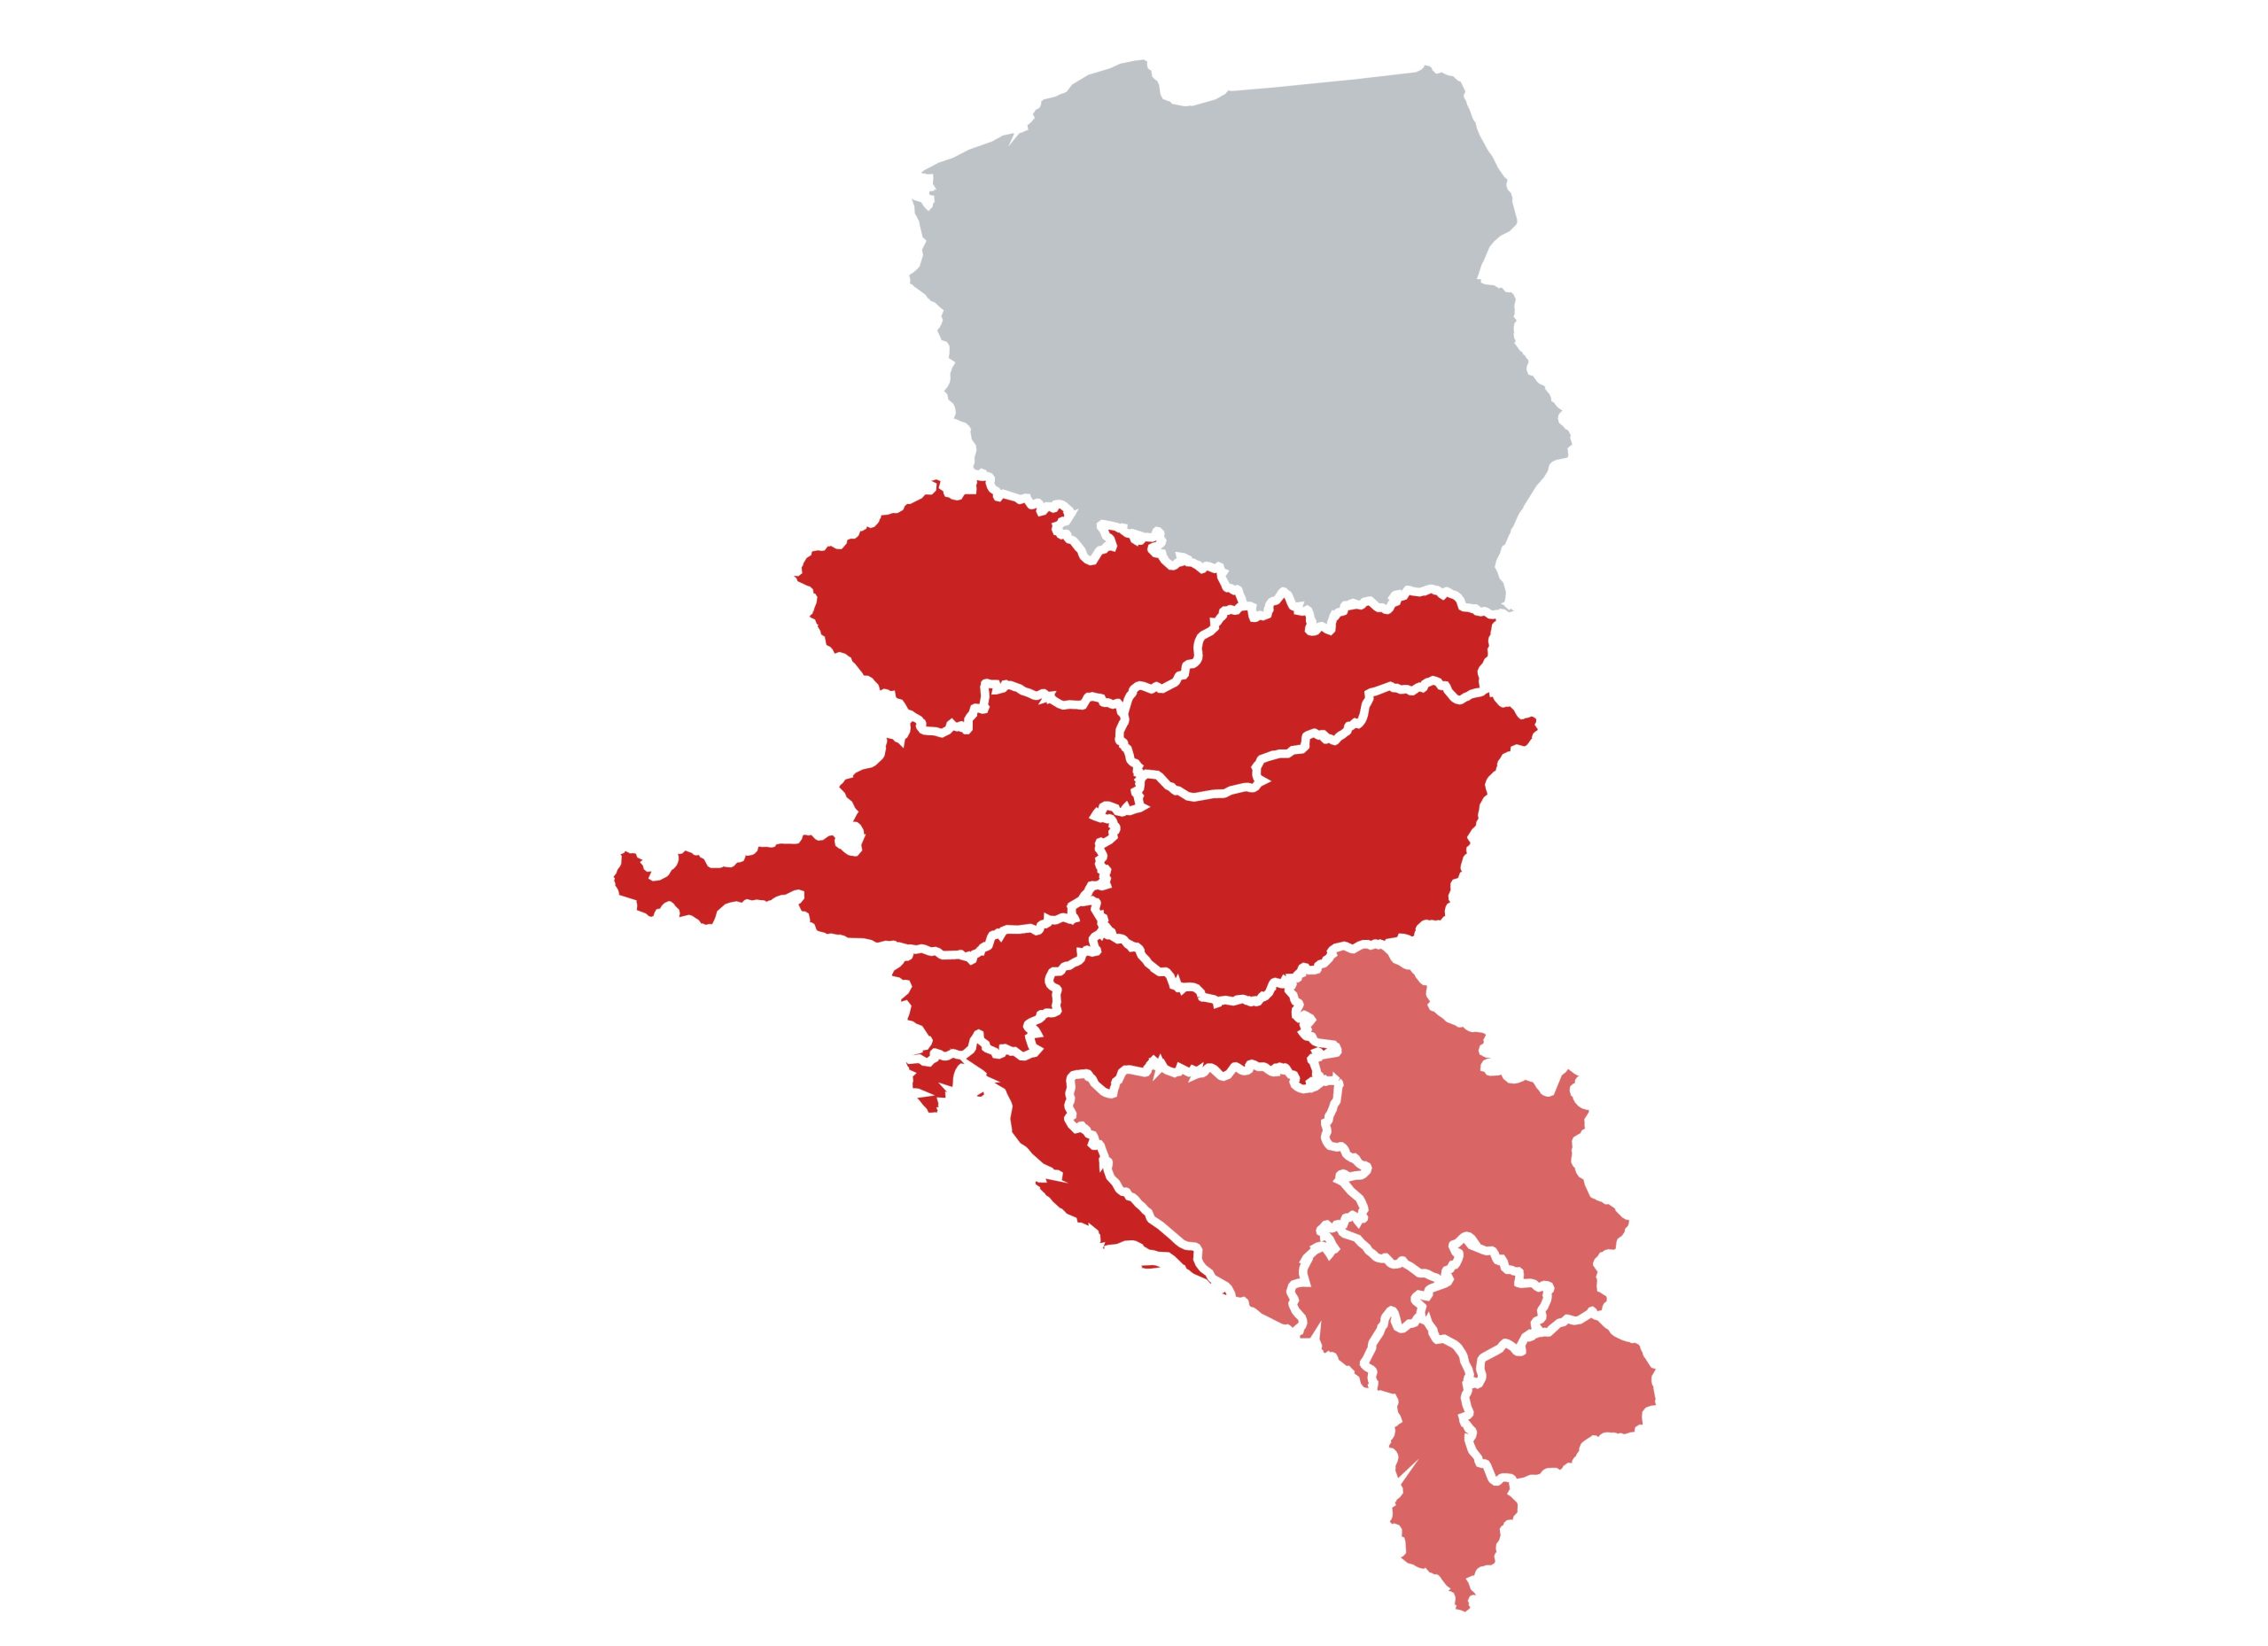 CEDC and Western Balkan countries